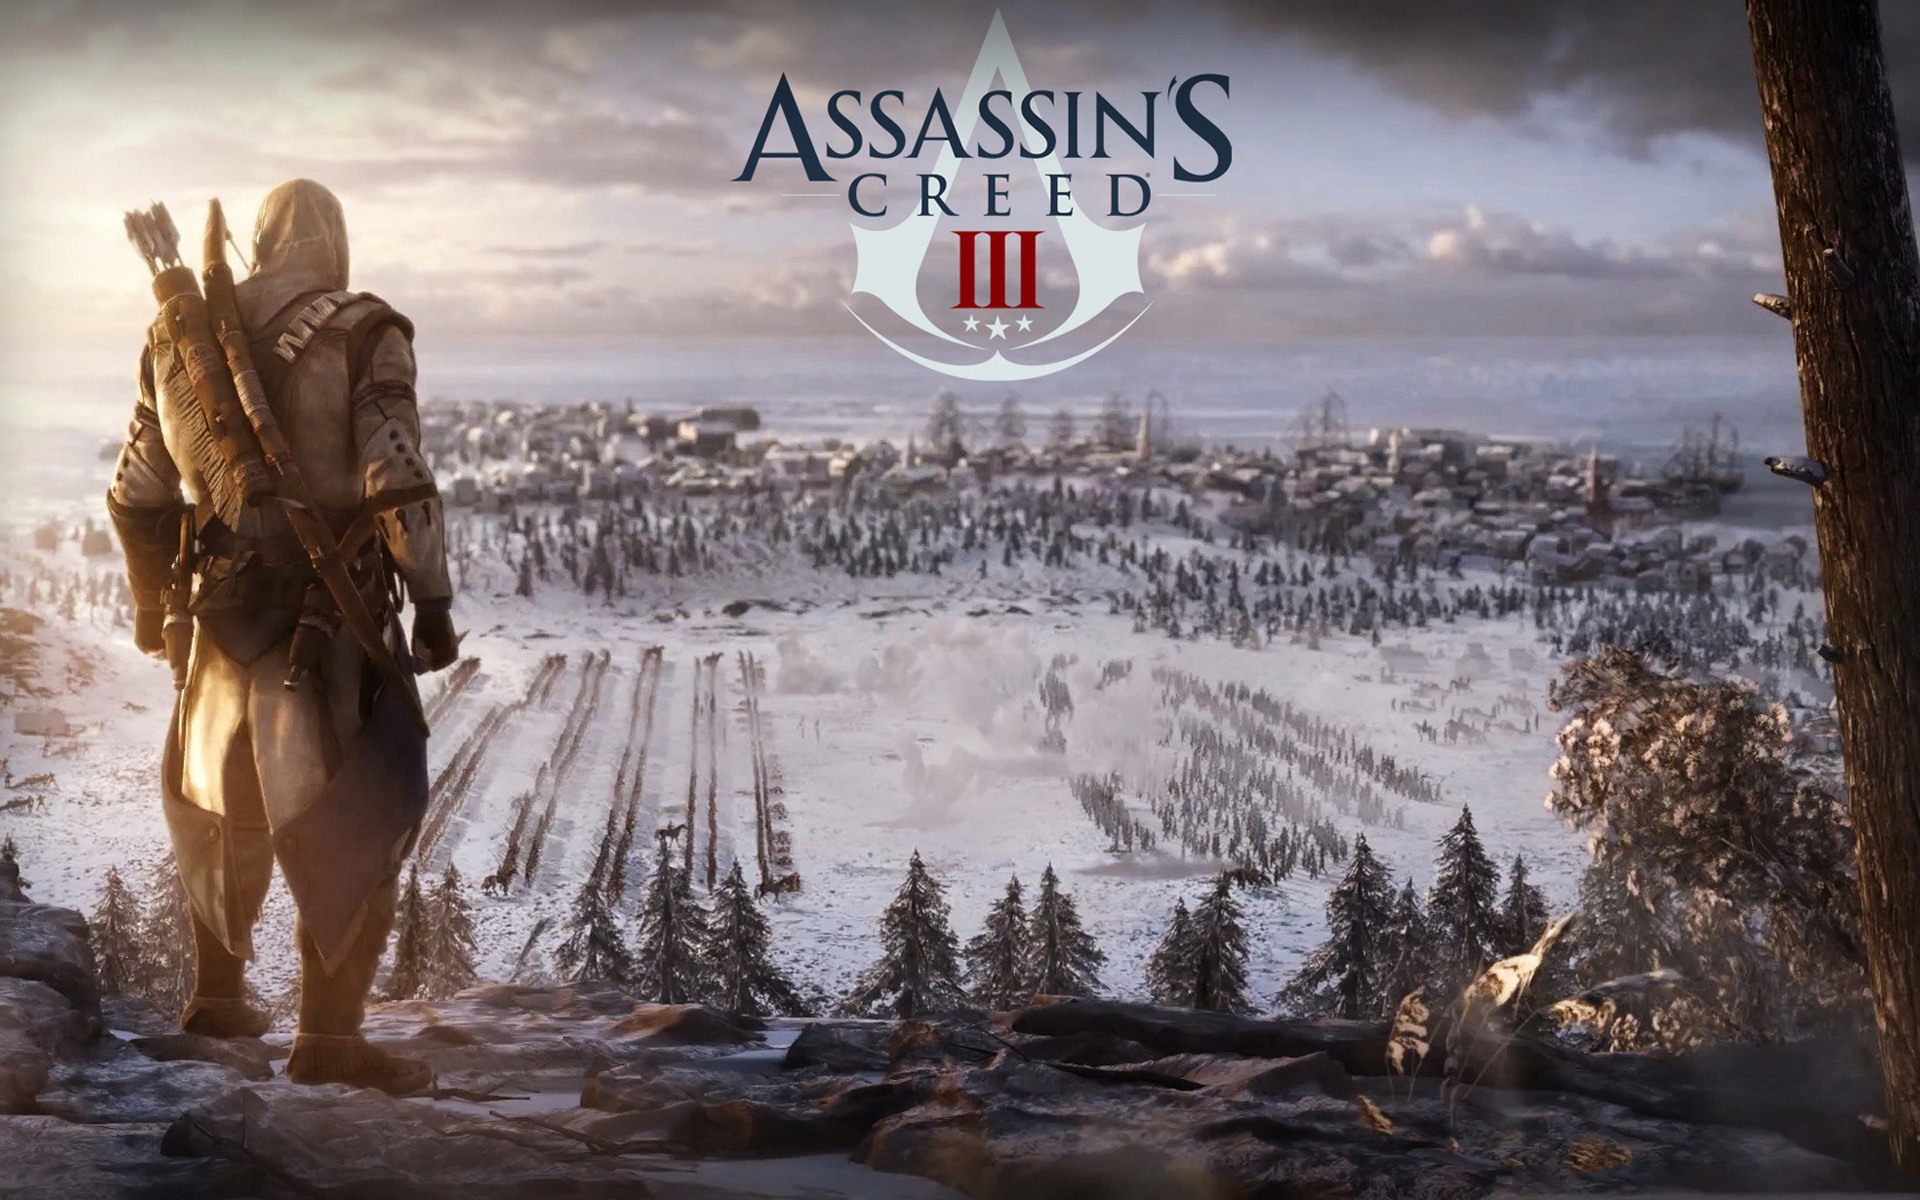 Assassin's Creed 3 HD wallpapers #17 - 1920x1200